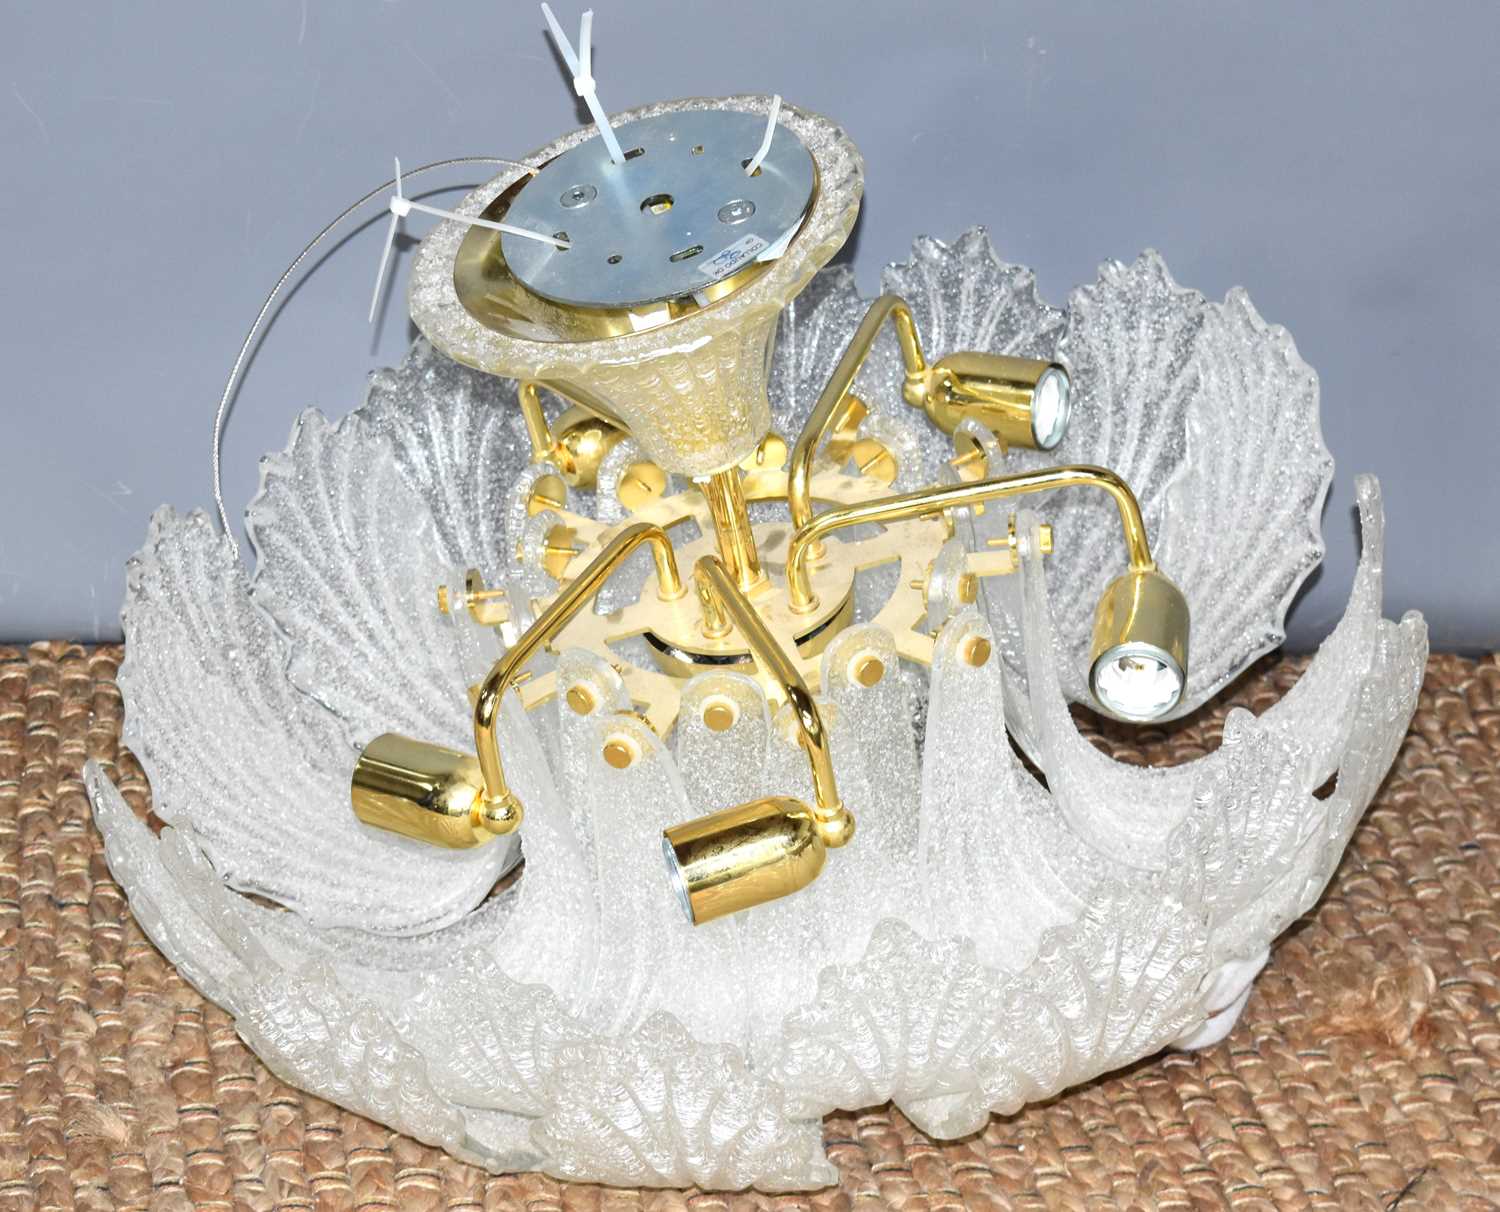 An ornate frosted glass ceiling light, likely Murano of tiered acanthus leaf form, 61cm diameter.